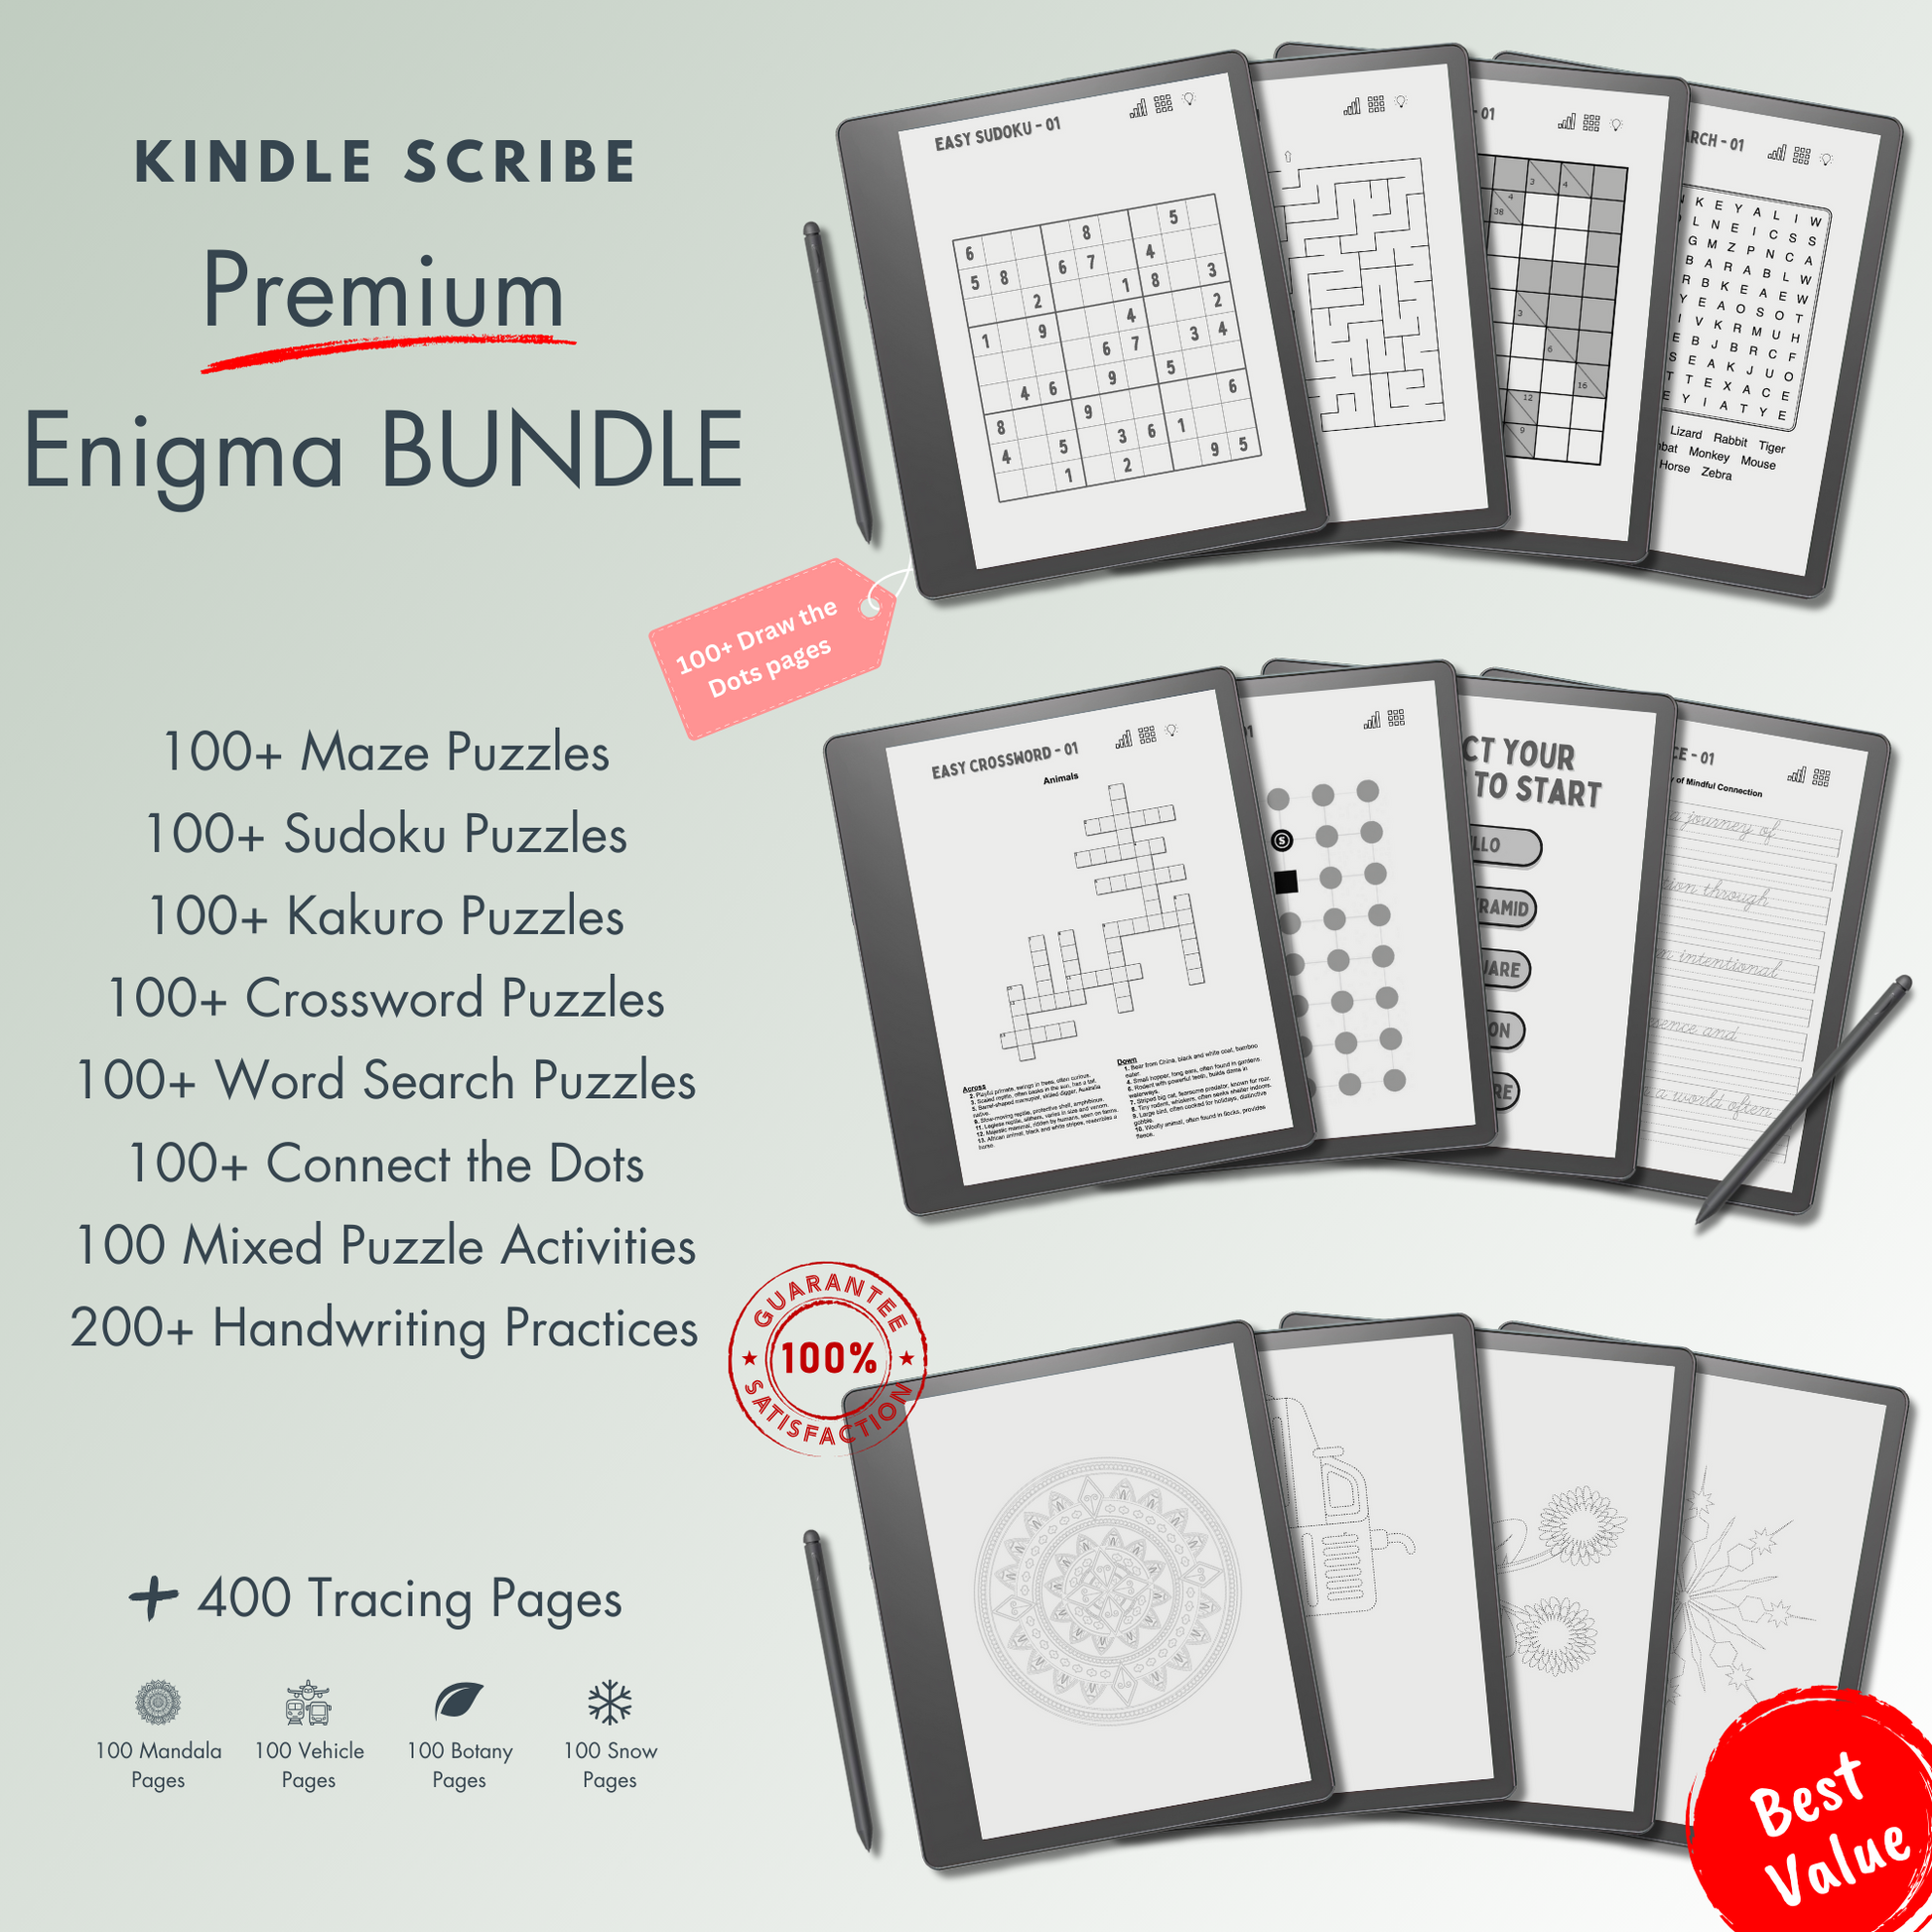 This is a Digital Bundle which includes the puzzles of 100+ Sudoku, 100+ Mazes, 100+ Kakuro, 100+ Word Search, 100+ Crossword, 100+ Connect the Dots, 100 Mixed Puzzles of various activities and 200+ Handwriting Practices tailored for Kindle Scribe.